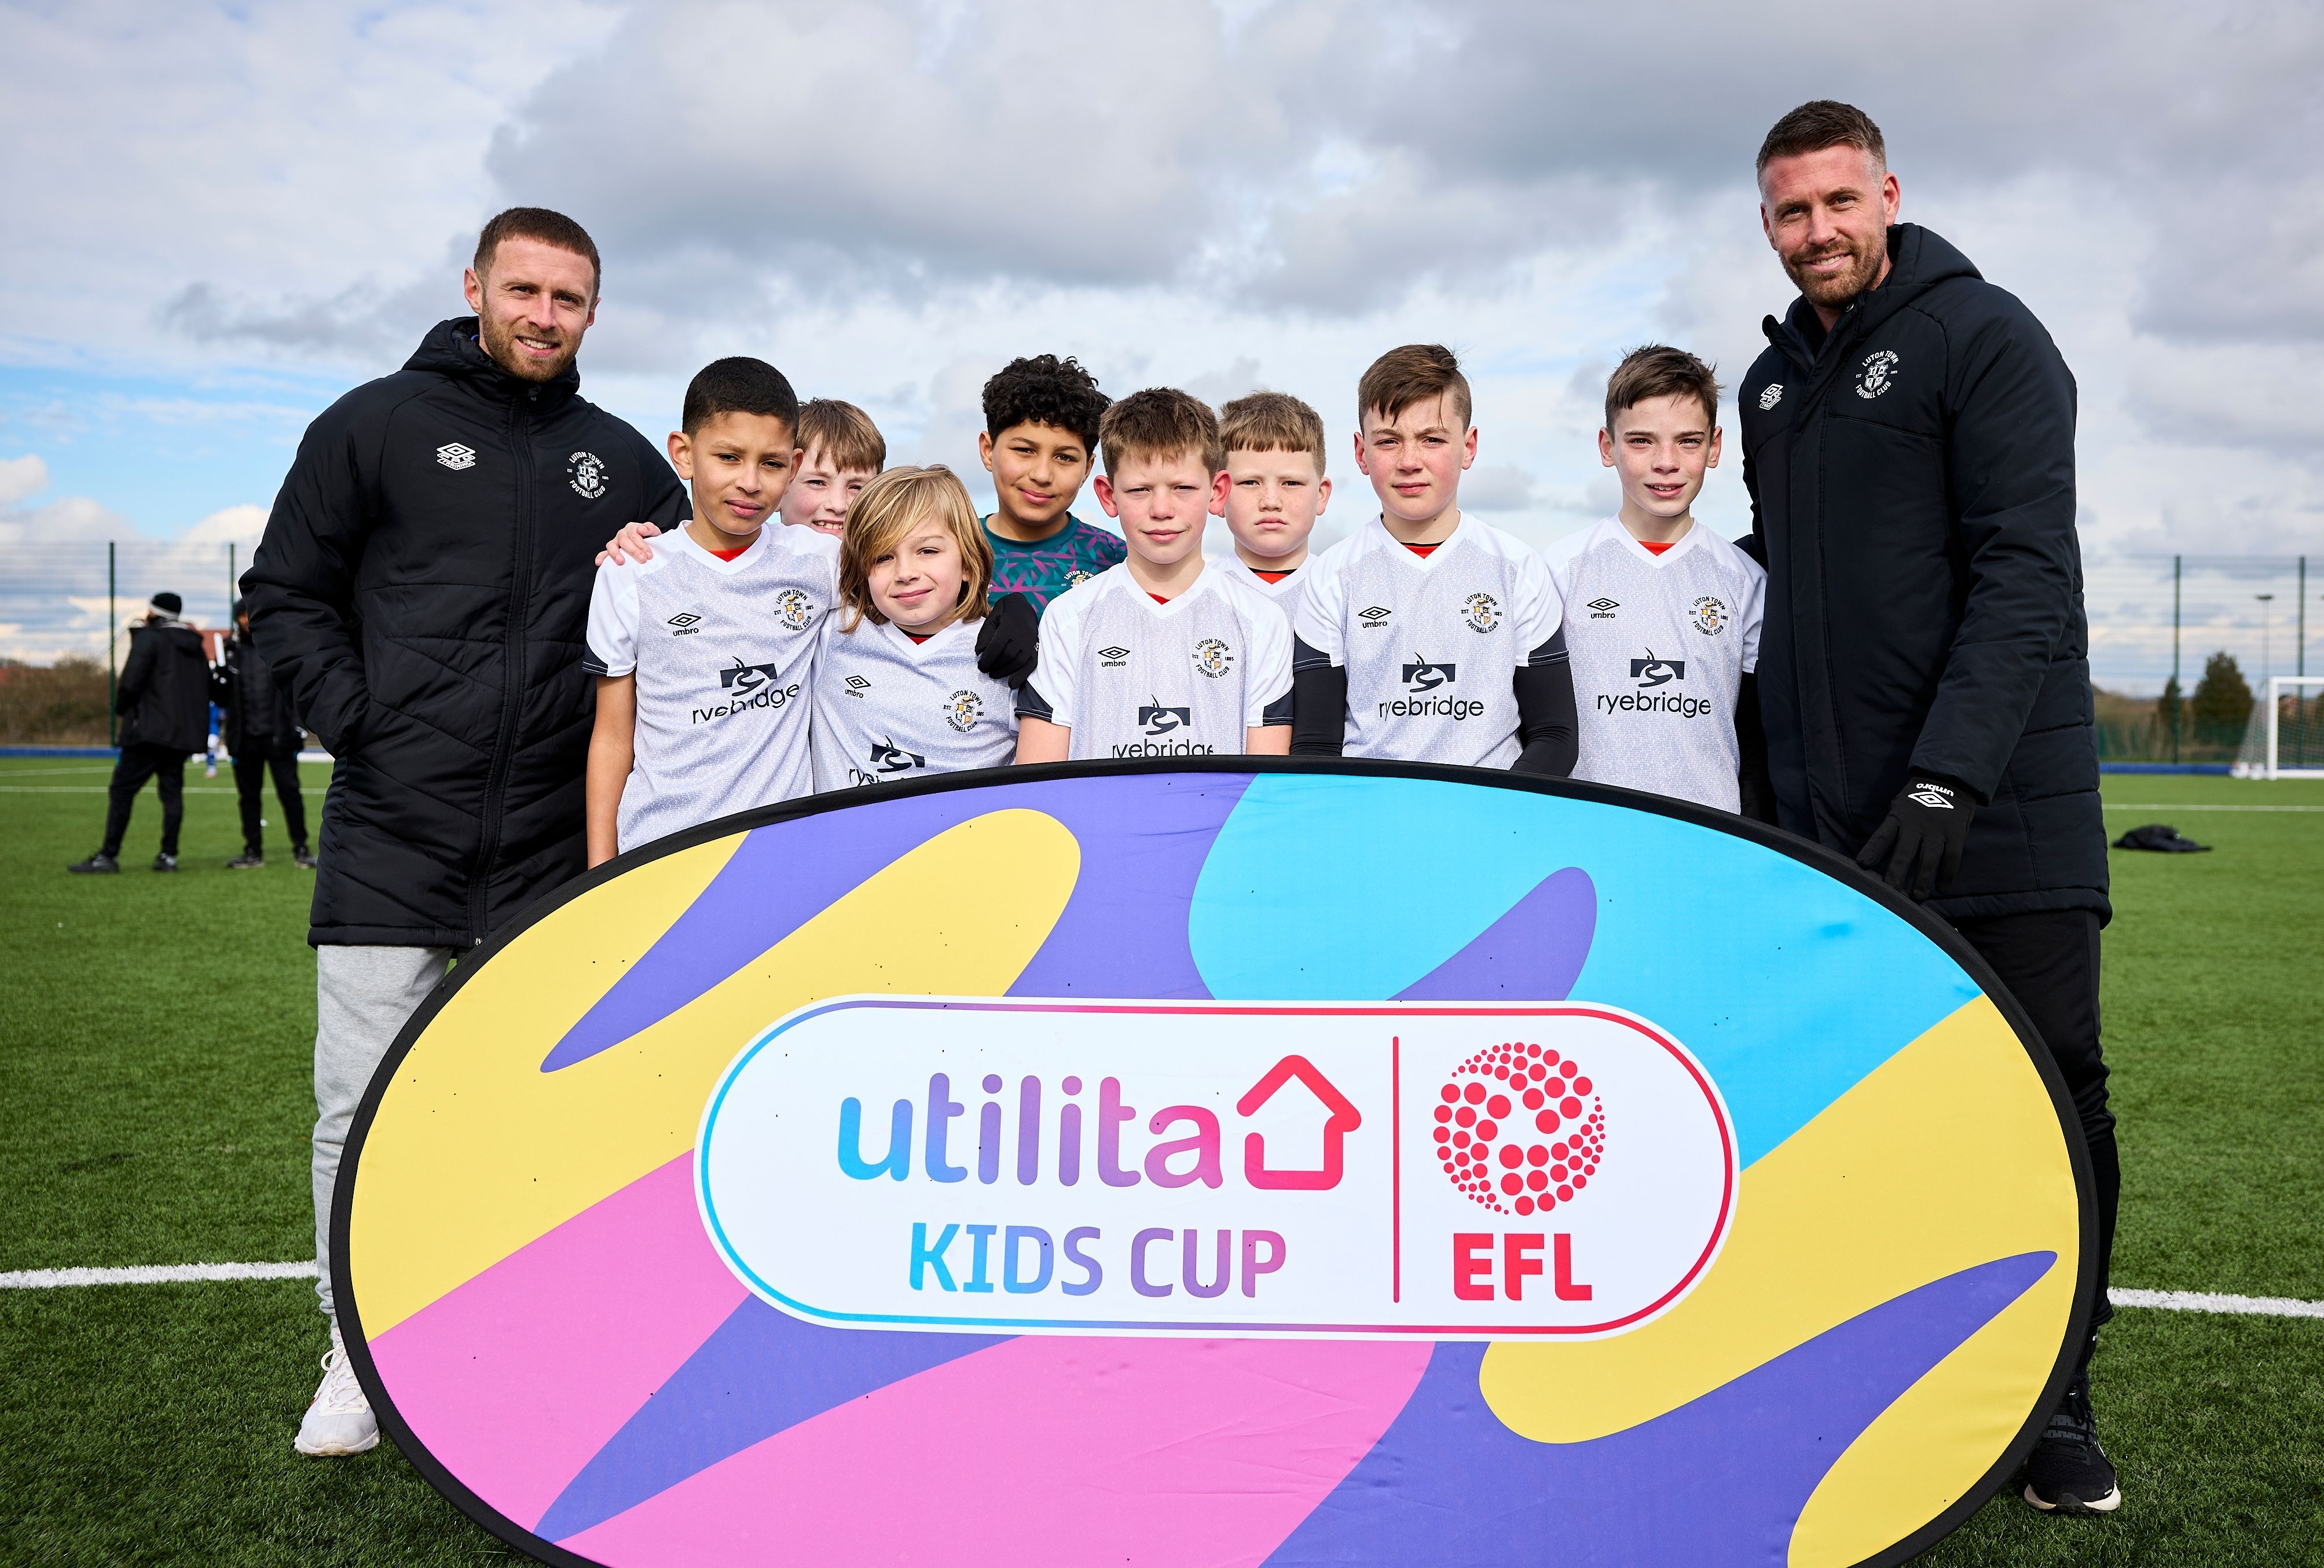 Mandatory Credit: Photo by Shutterstock (13794824af) Rob Edwards manager of Luton Town and Jordan Clark of Luton Town pose for a team picture with children representing Luton Town Football Club Utilita Kids Cup, Football, Creasey Park Football Centre, Bedford, UK - 07 Mar 2023